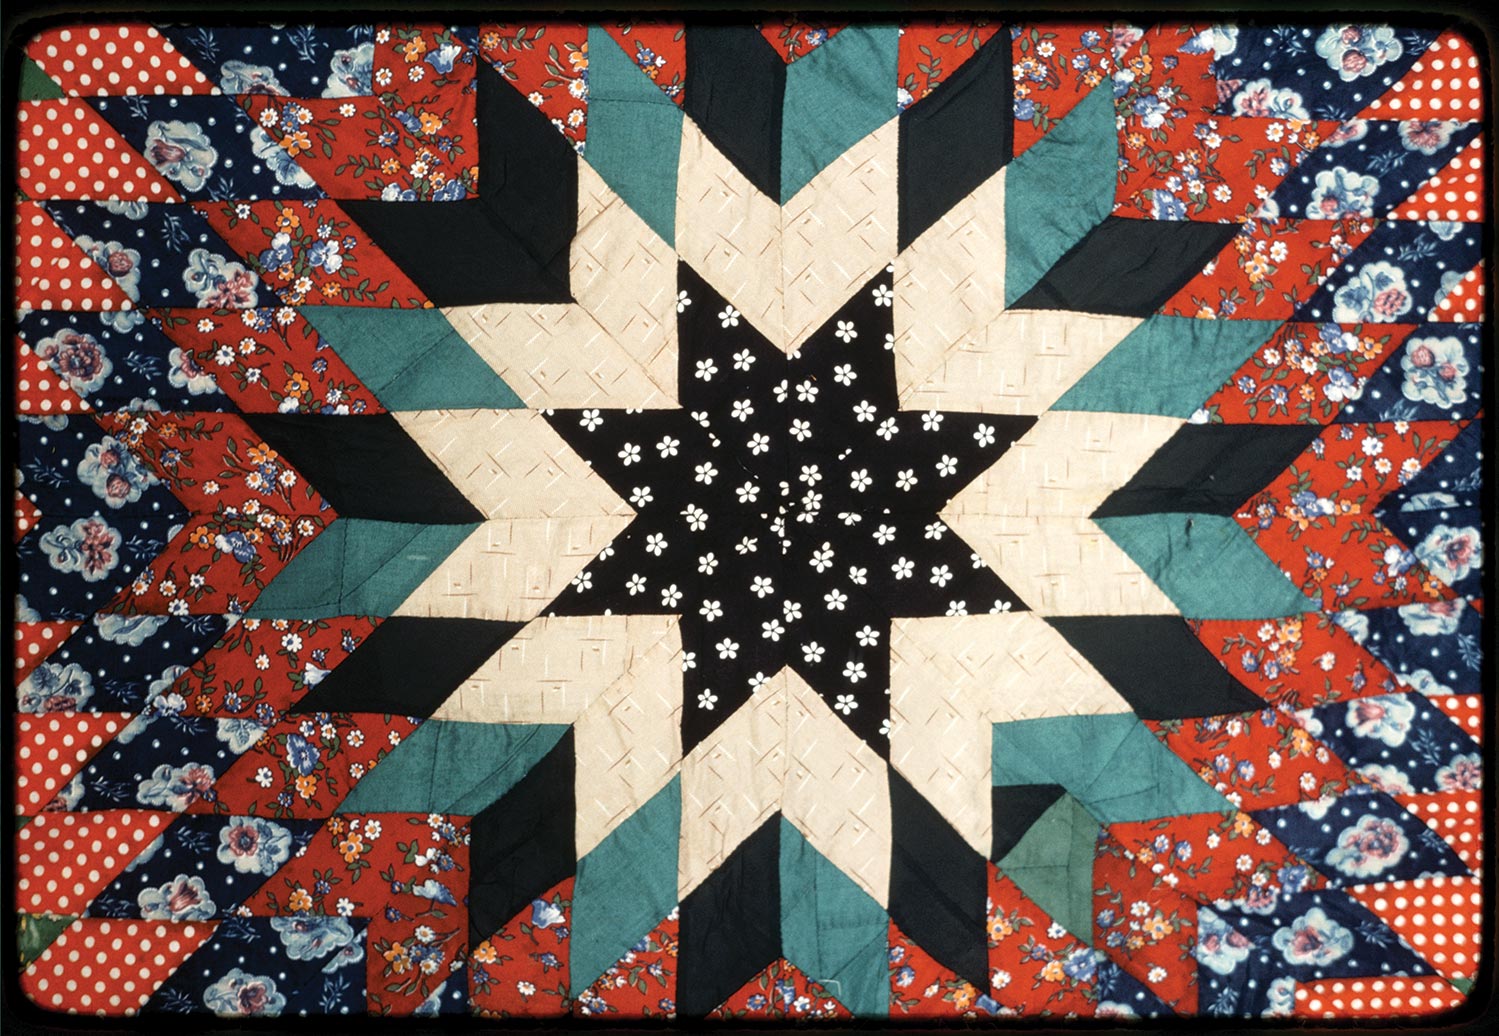 A Lone Star quilt created by Mrs. Sam T Smith. Photo by Geraldine Niva Johnson. Image retrieved from American Folklife Center at the Library of Congress.